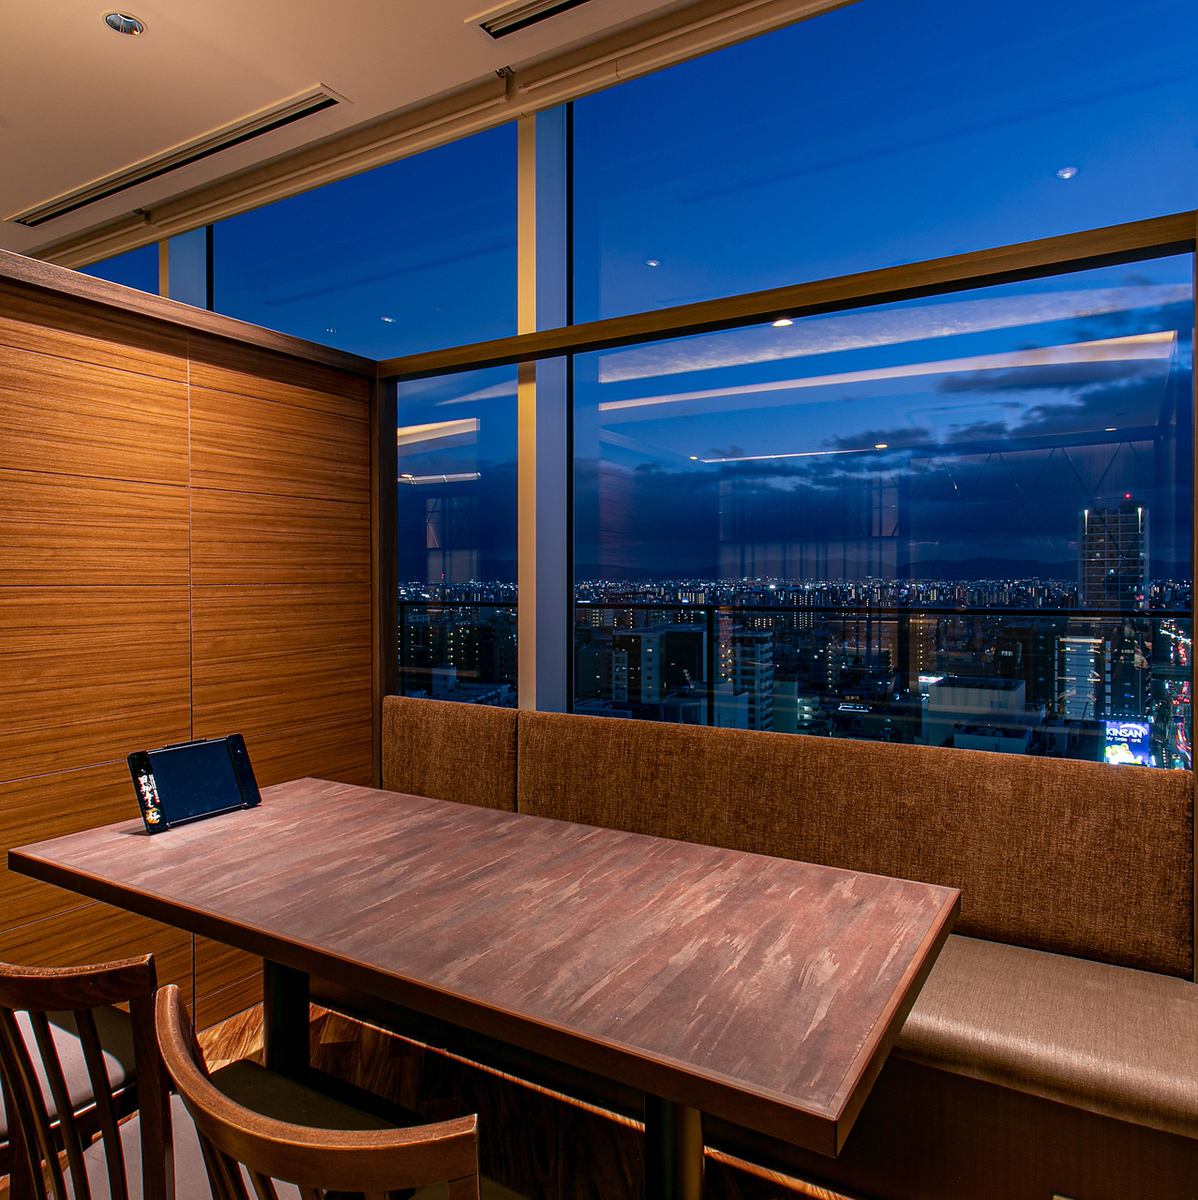 Abeno Harukas 13th floor ★ Seats with a view of the night view are available ♪